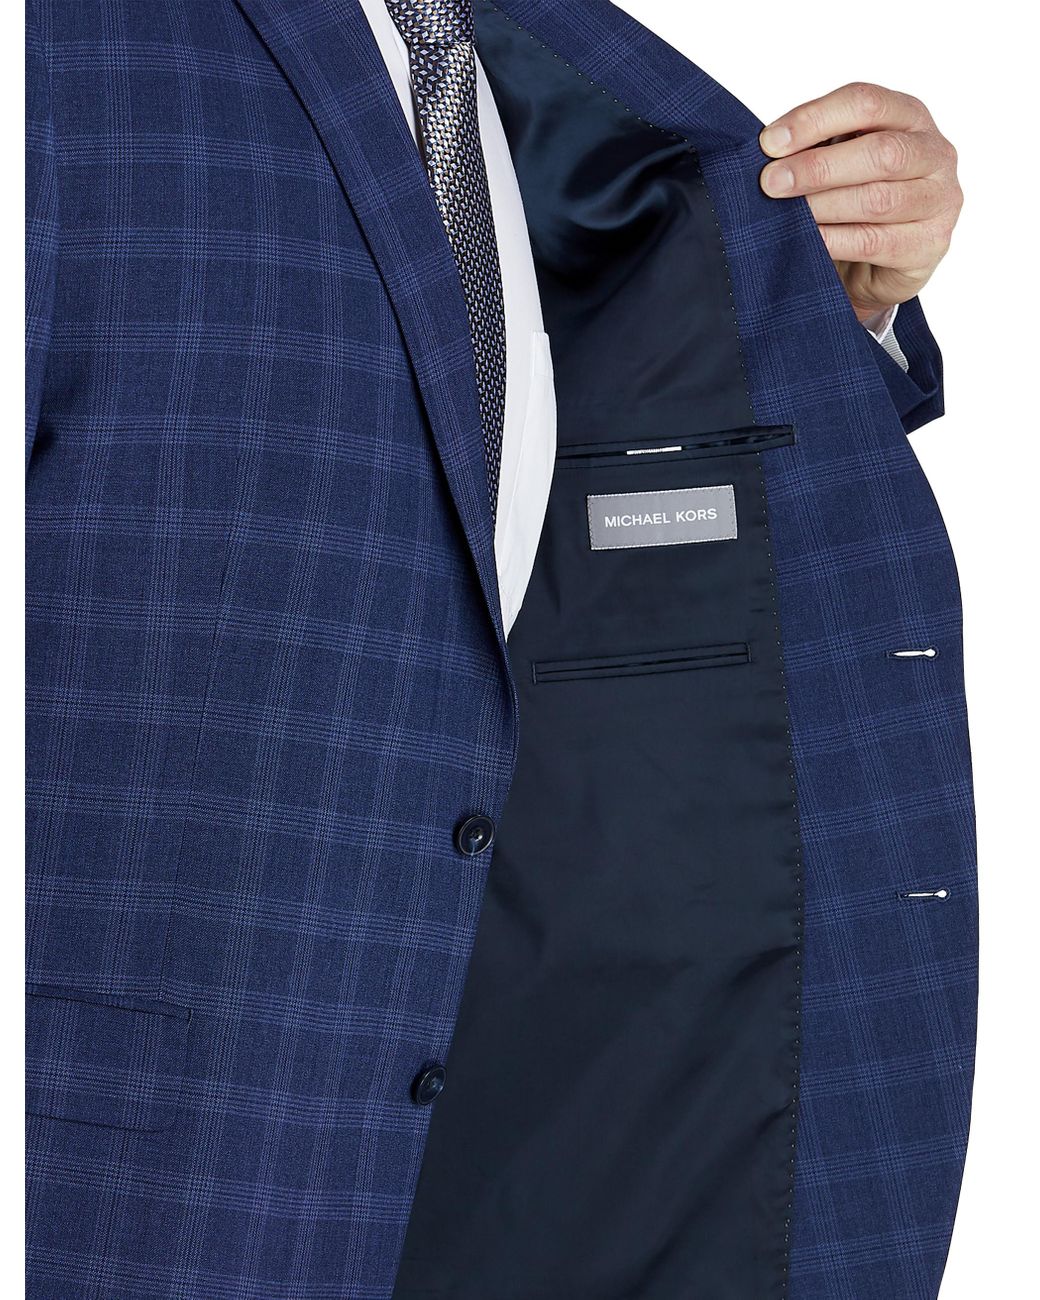 Michael Kors Big & Tall Plaid Suit Jacket in Blue for Men | Lyst